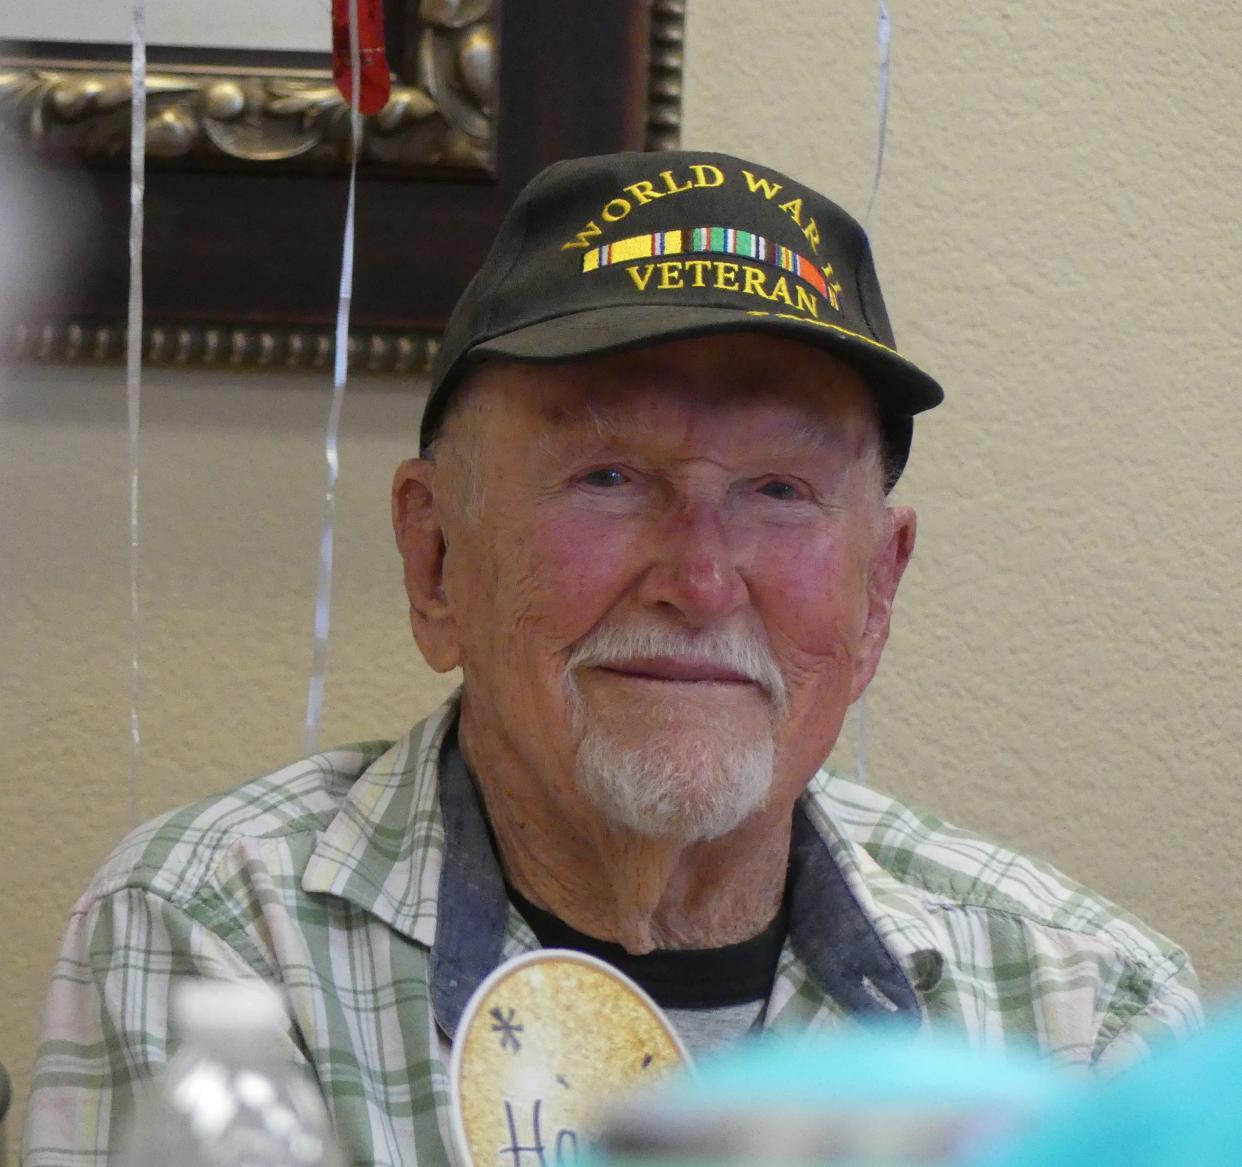 World War II veteran and retired Army Air Corps pilot Donald Roser celebrated his 99th birthday on Saturday in Apple Valley.